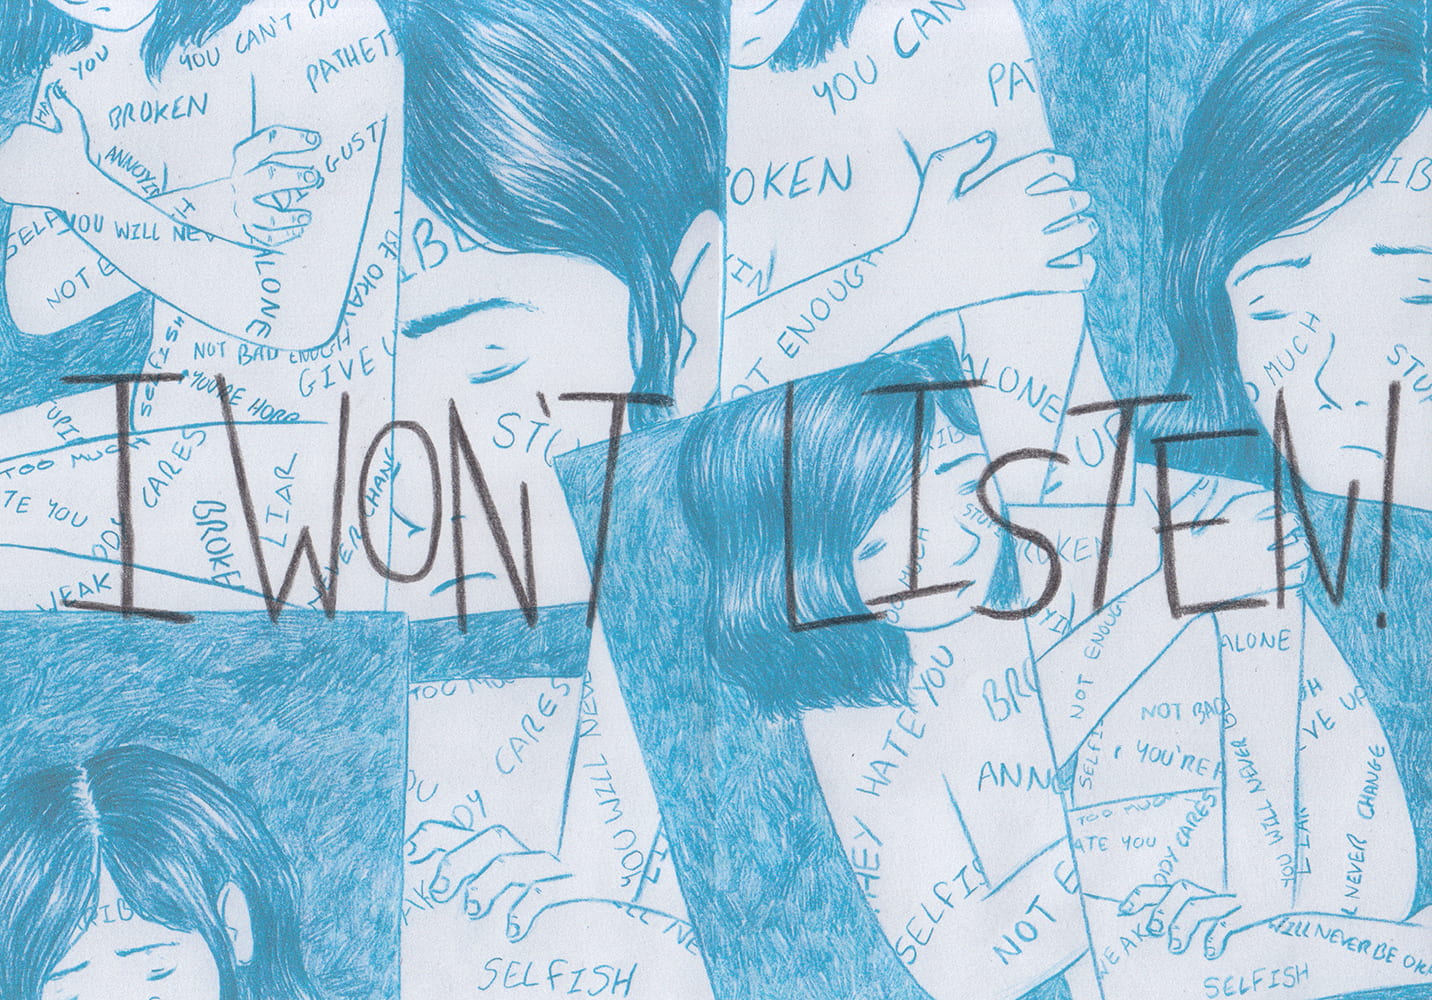 Illustration created to be a spread in a zine about protesting against the negative voices in your head.